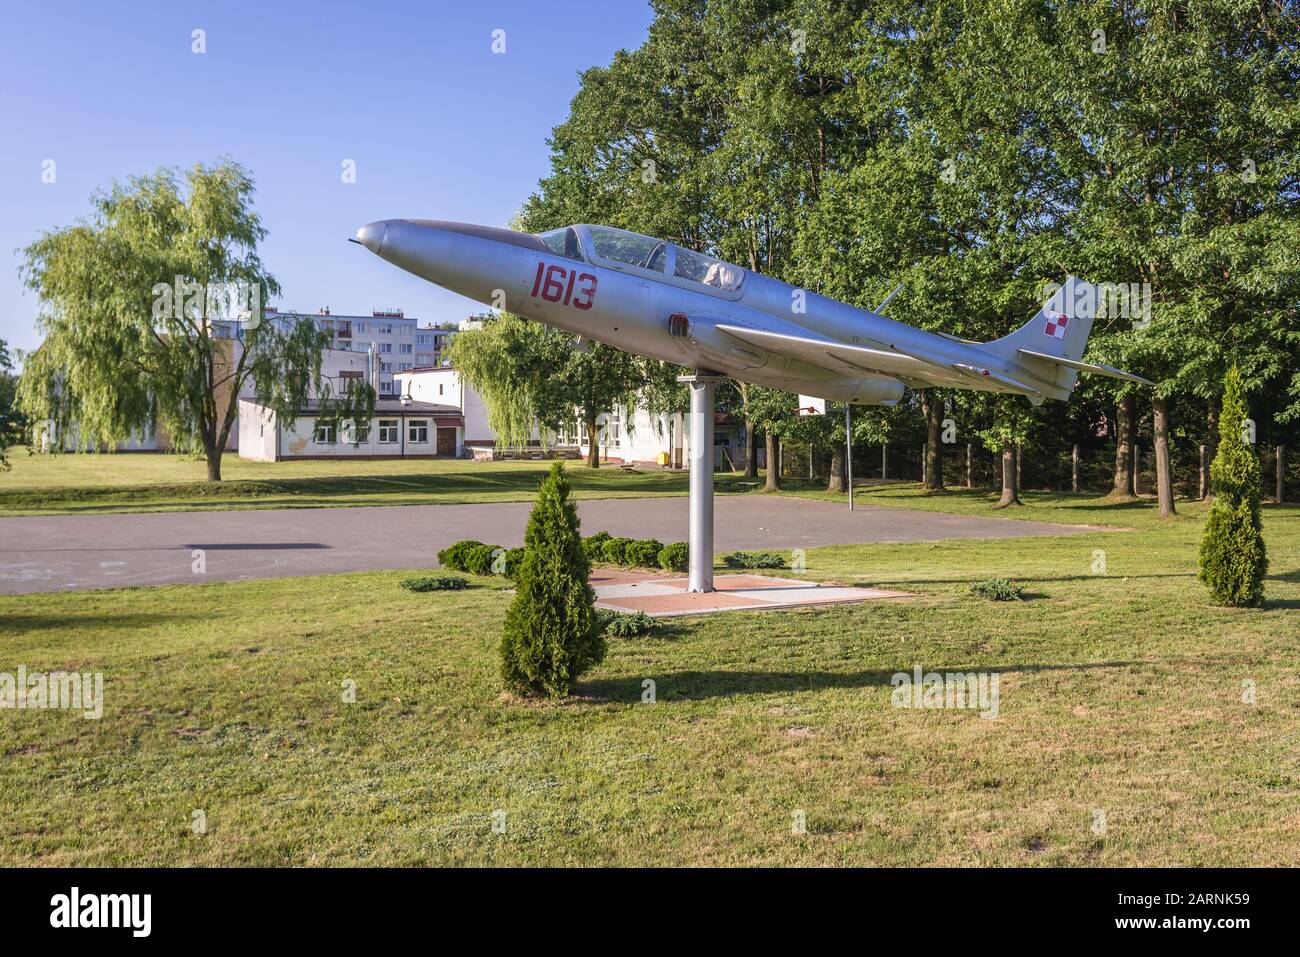 PZL TS-11 Iskra next to primary School in Swidwin, capital of Swidwin County in West Pomeranian Voivodeship of northwestern Poland Stock Photo